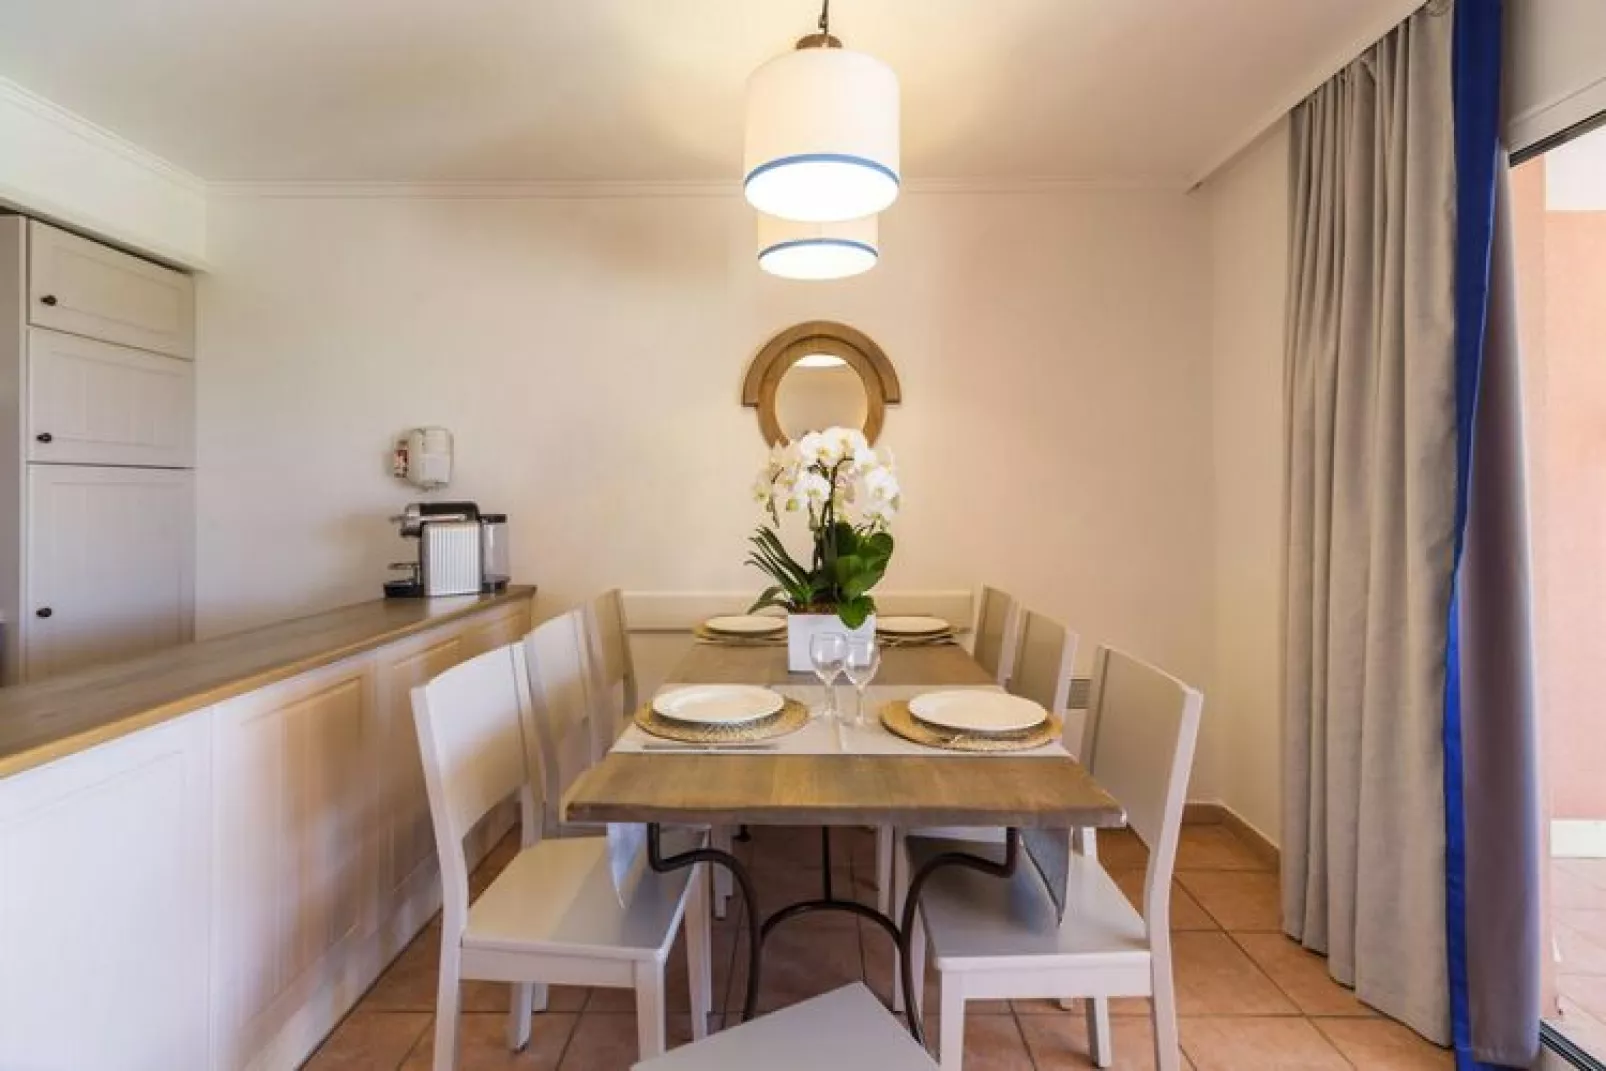 Residence Les Calanques, Les Issambres-24 Standard - Apt. 4 p. - 1 bedroom-Woonkamer